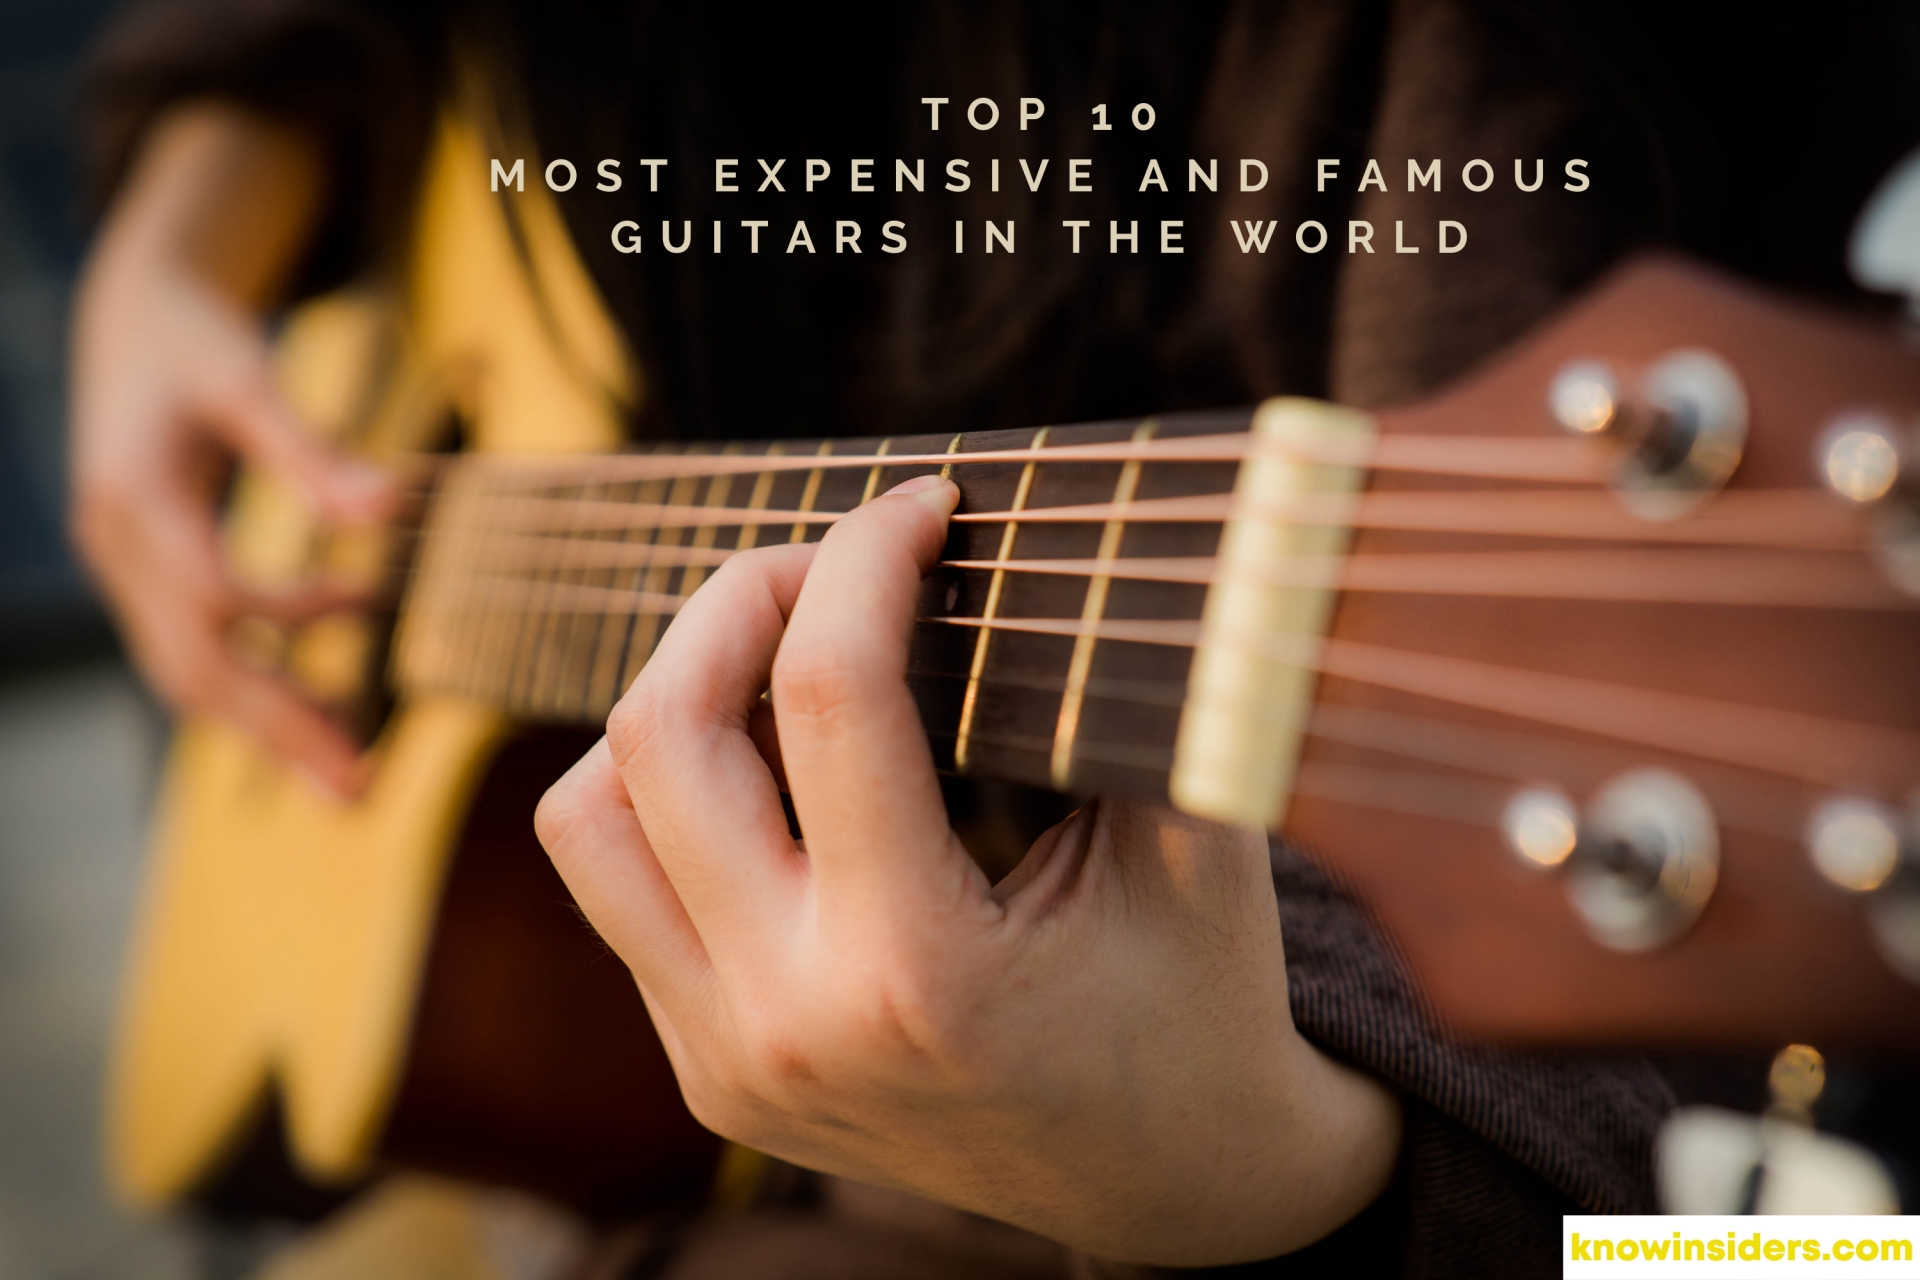 Top 10 Most Expensive And Famous Guitars In The World